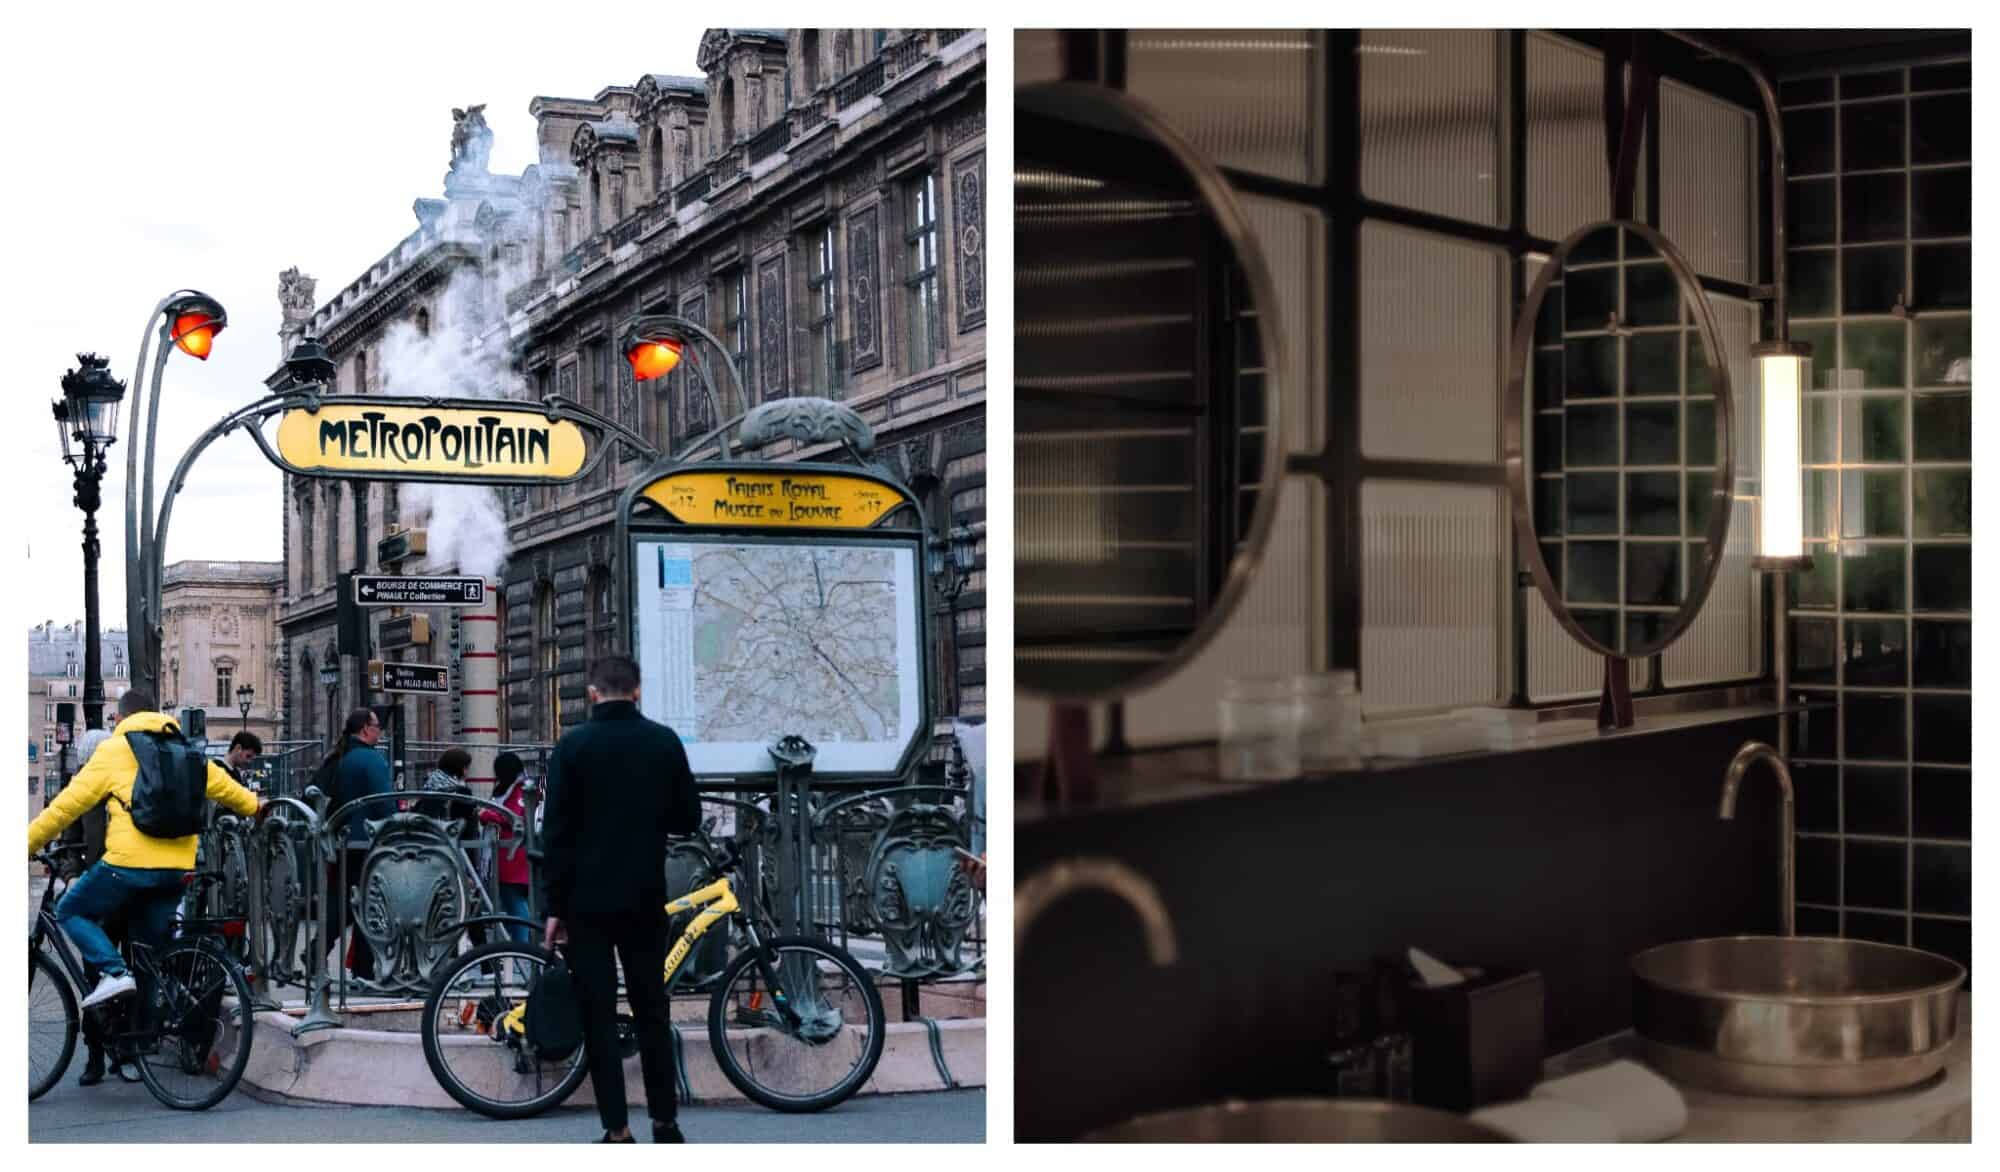 Left: the green and yellow art deco entrance to the Paris metro with a man and his bicycle out front and a historic building in the back; right: the interior of a public bathroom with round mirrors and stylish industrial decor.